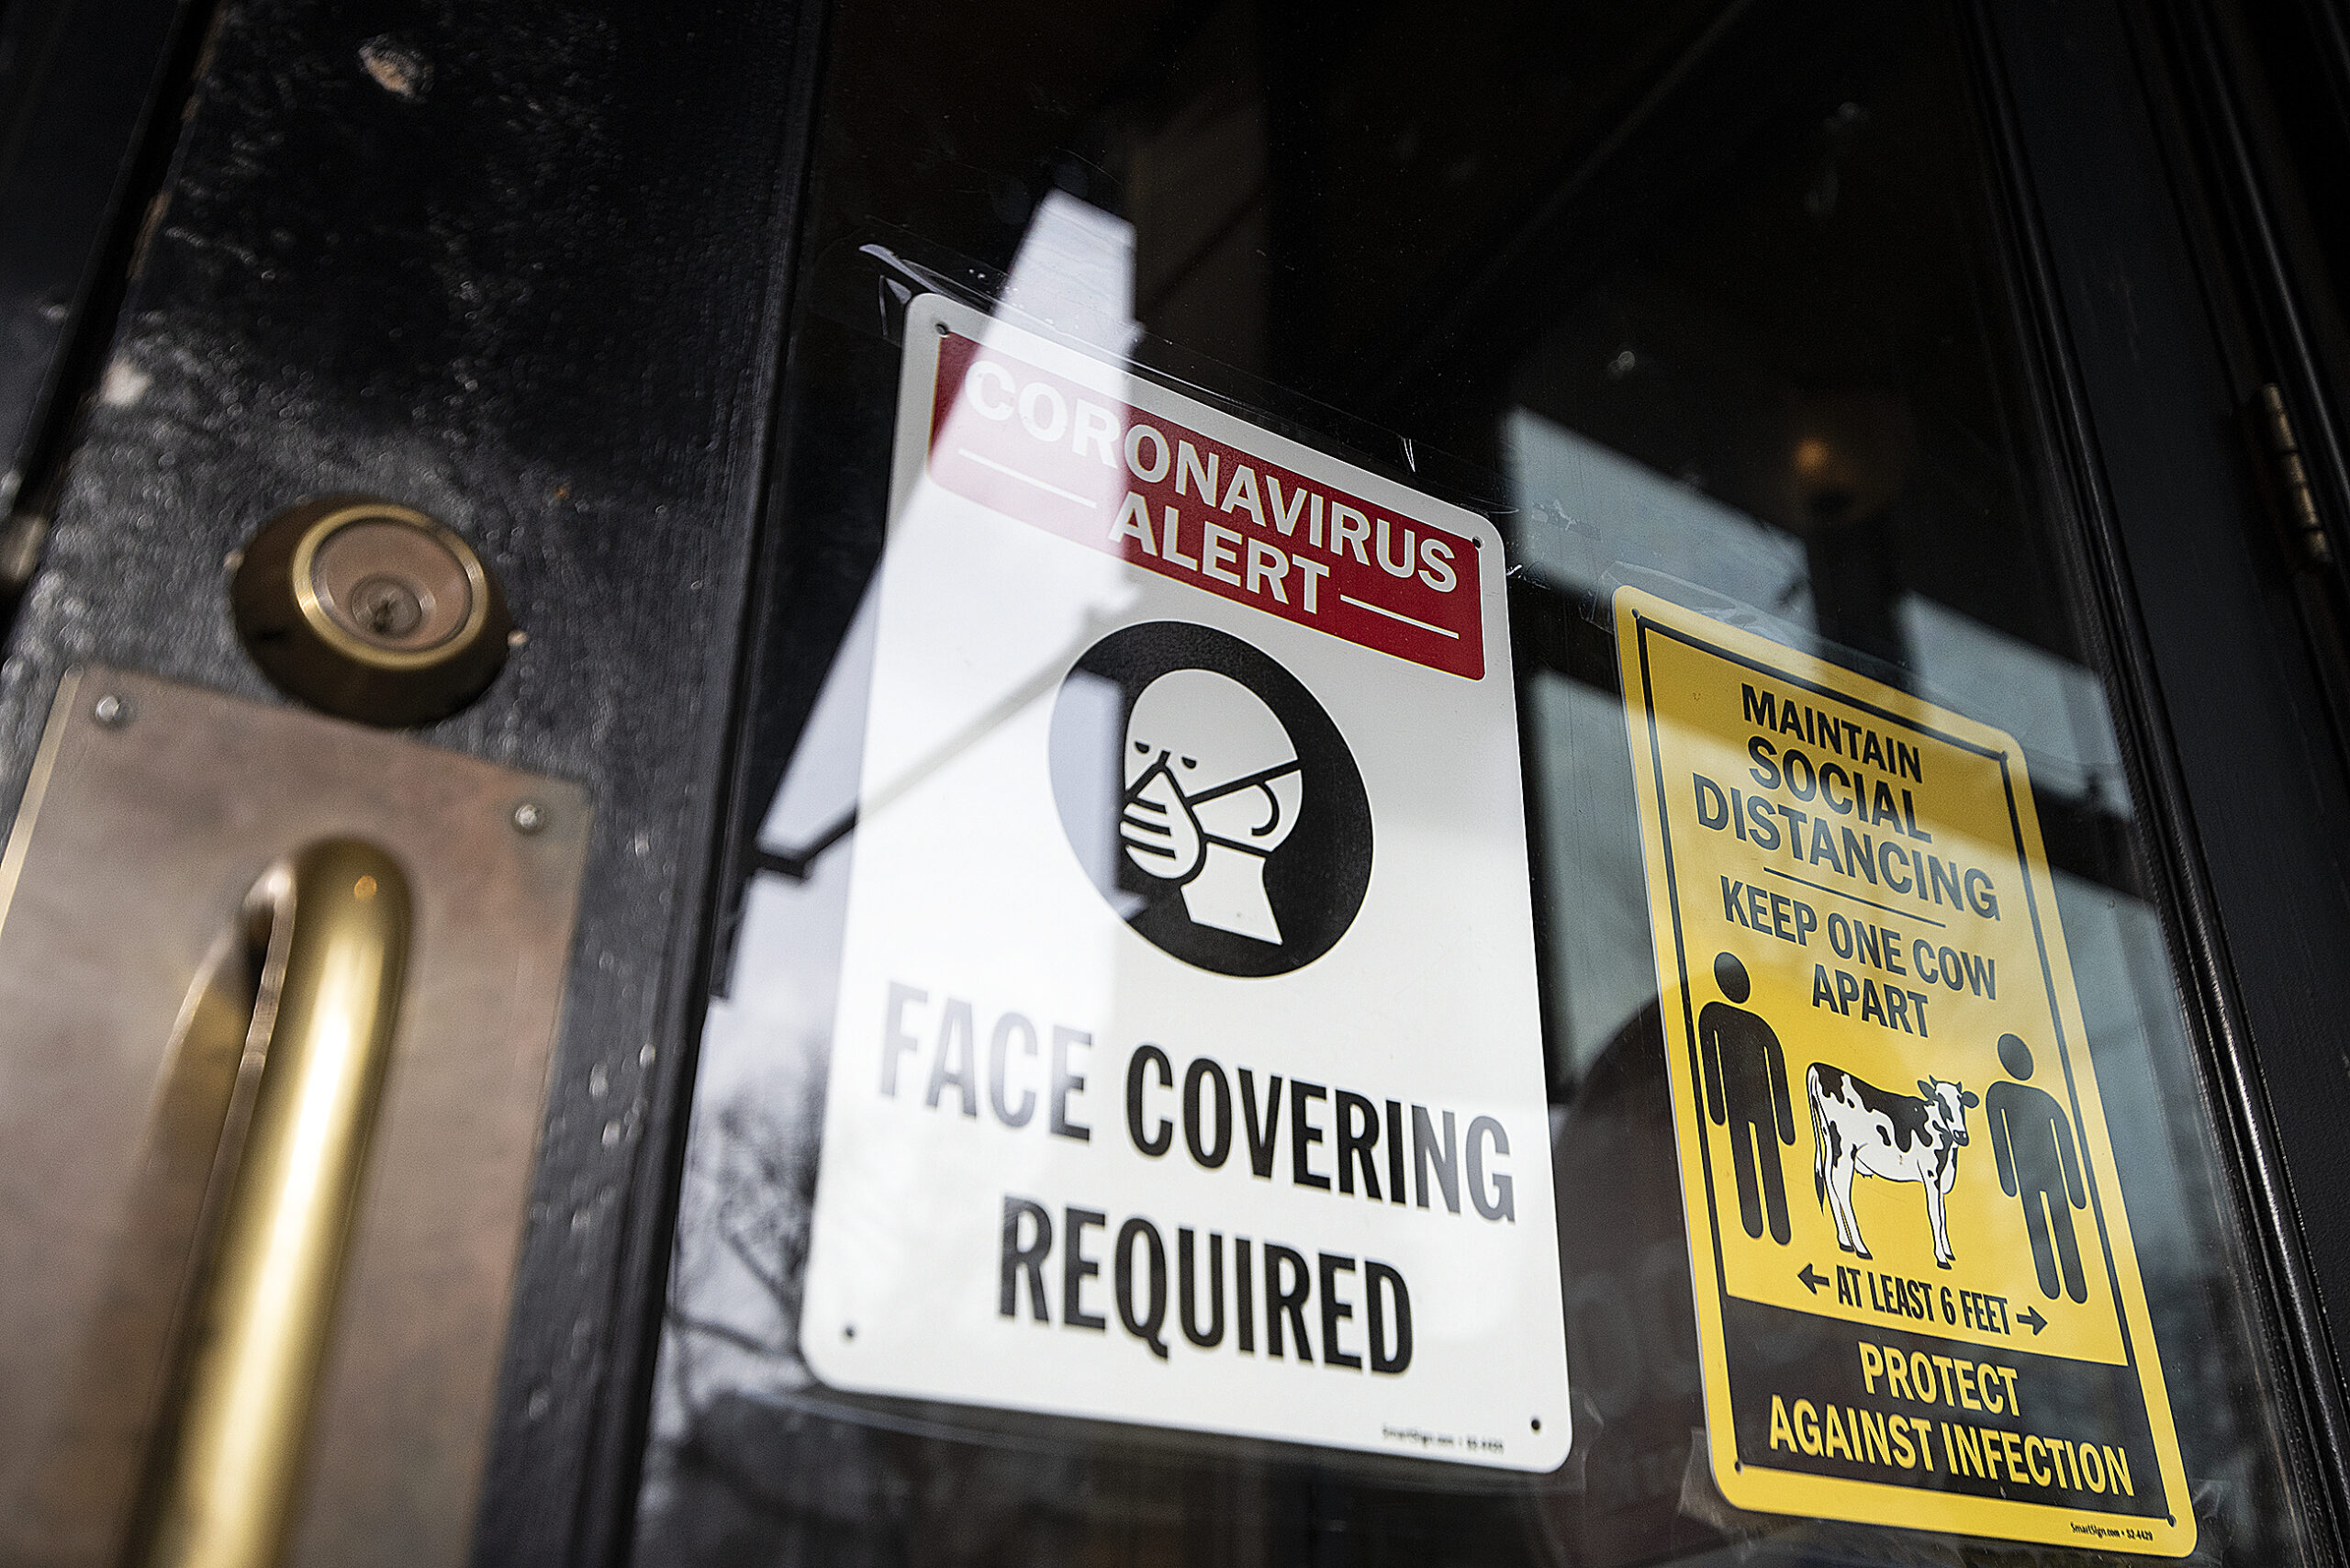 A sign on a clear glass door says "Face Covering Required."